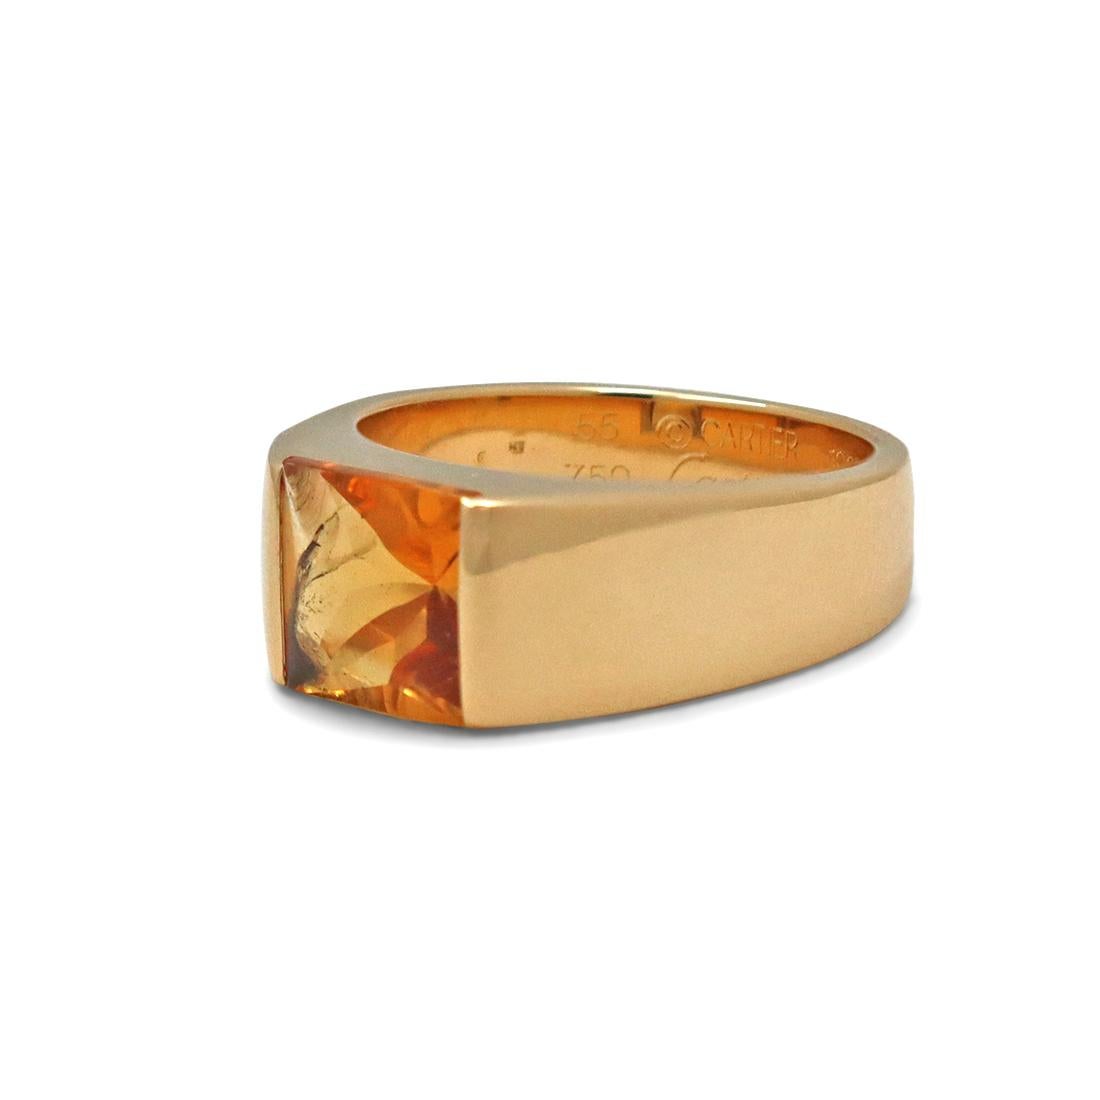 Authentic Cartier 'Tank' ring crafted in 18 karat yellow gold centering on a square-shaped citrine stone measuring approximately 8mm. Signed Cartier, 750, 1997, 53, with serial number and hallmark. Ring size 53 EU, 7 1/4 US. The ring is presented